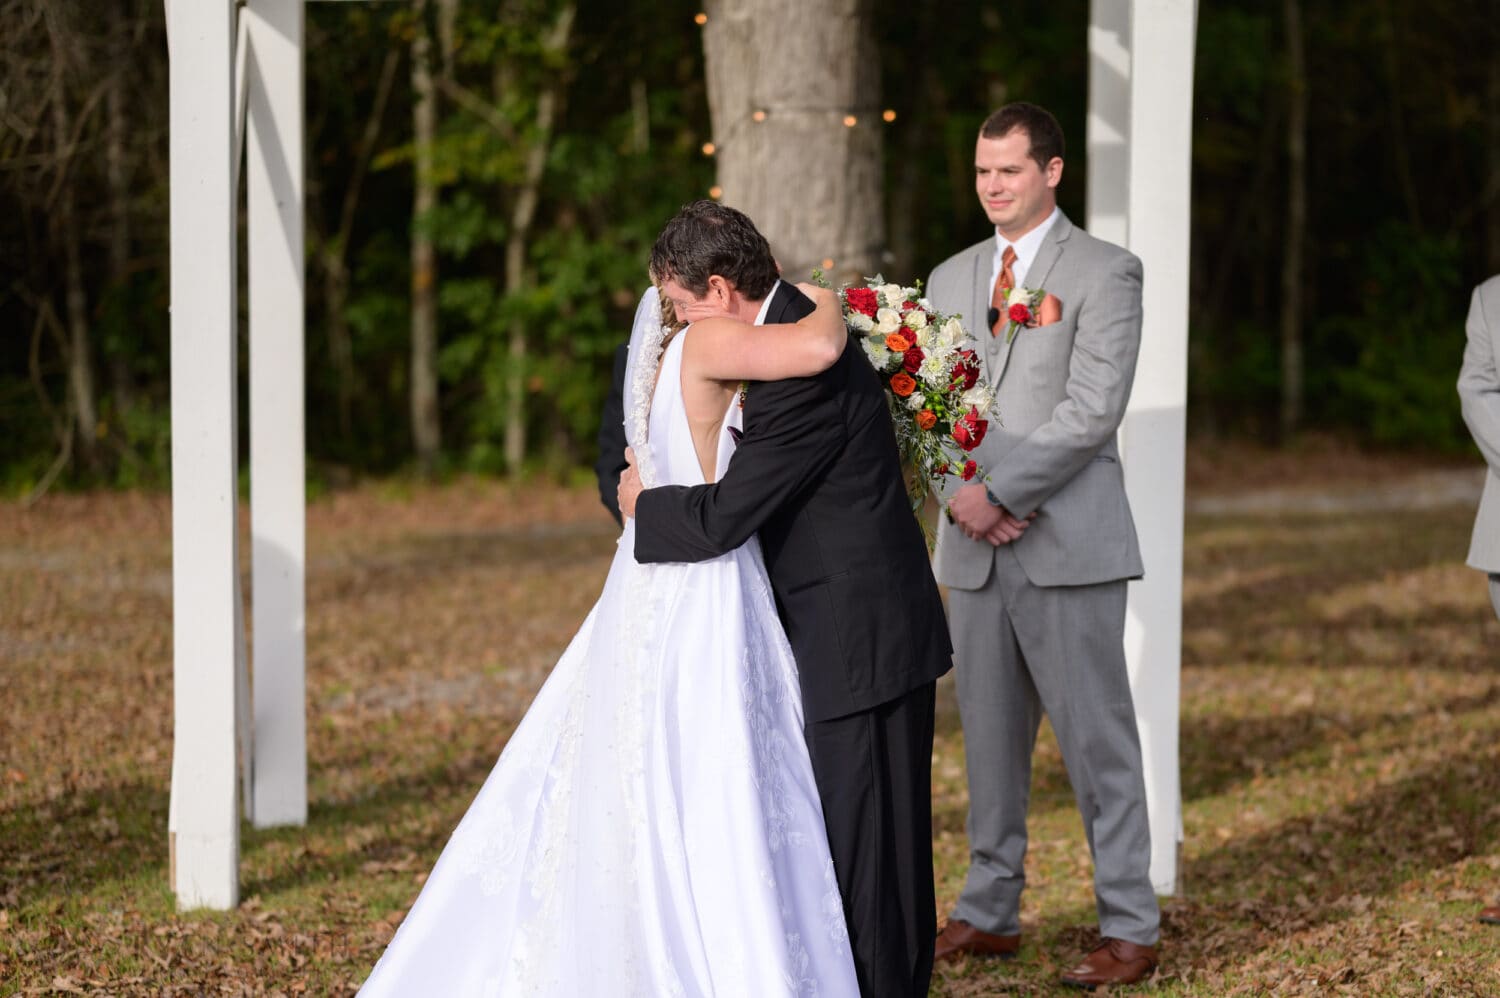 Hug from dad during the ceremony - The Blessed Barn